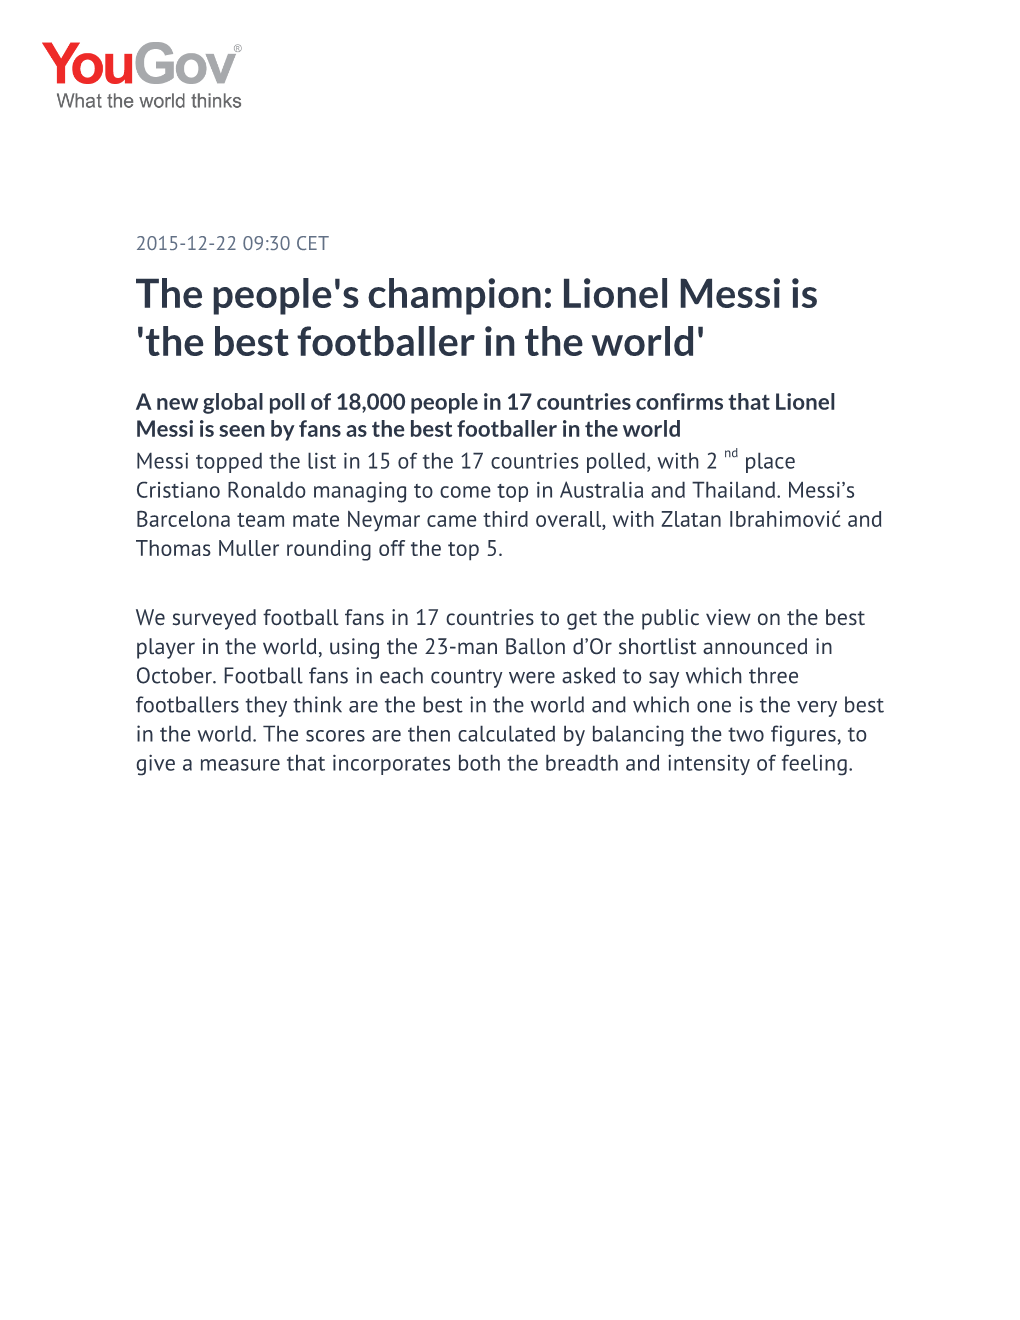 The People's Champion: Lionel Messi Is 'The Best Footballer in the World'